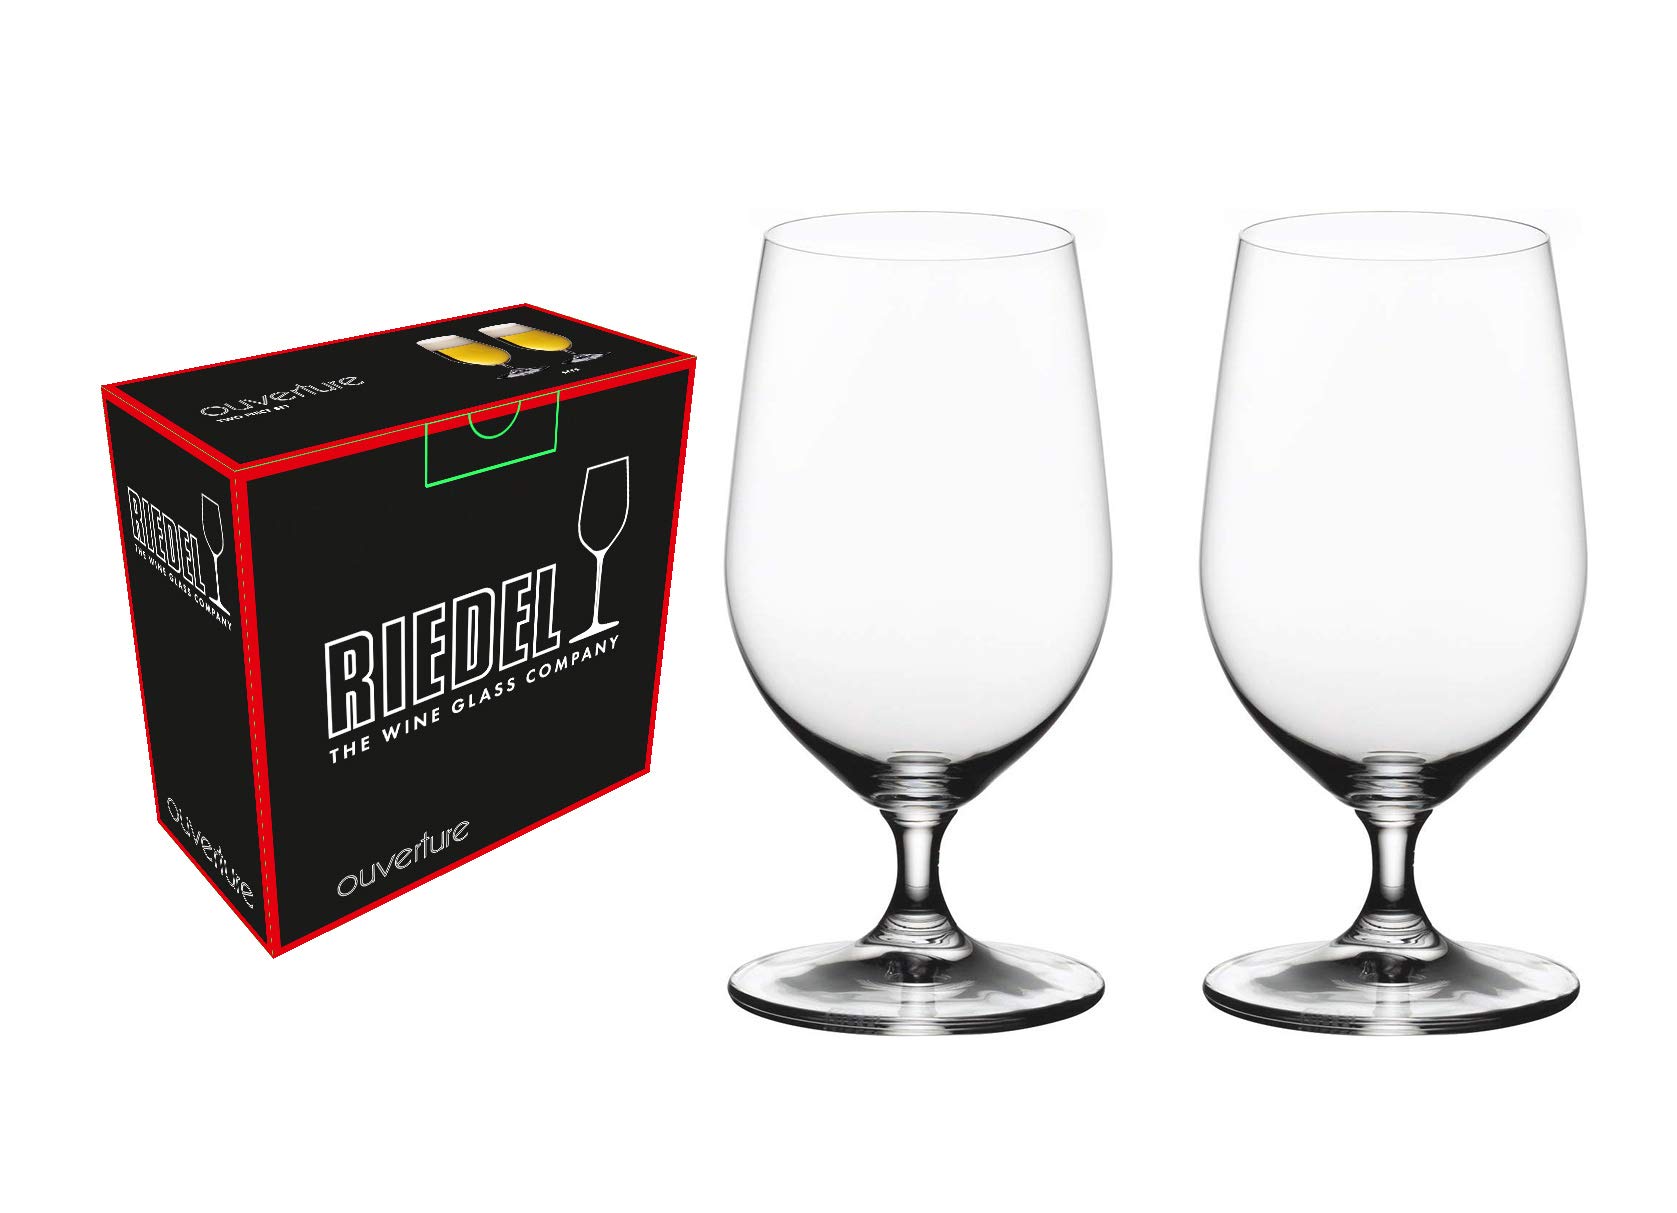 Riedel Ouverture Glasses, 2 Count (Pack of 1), Beer/Ice Water